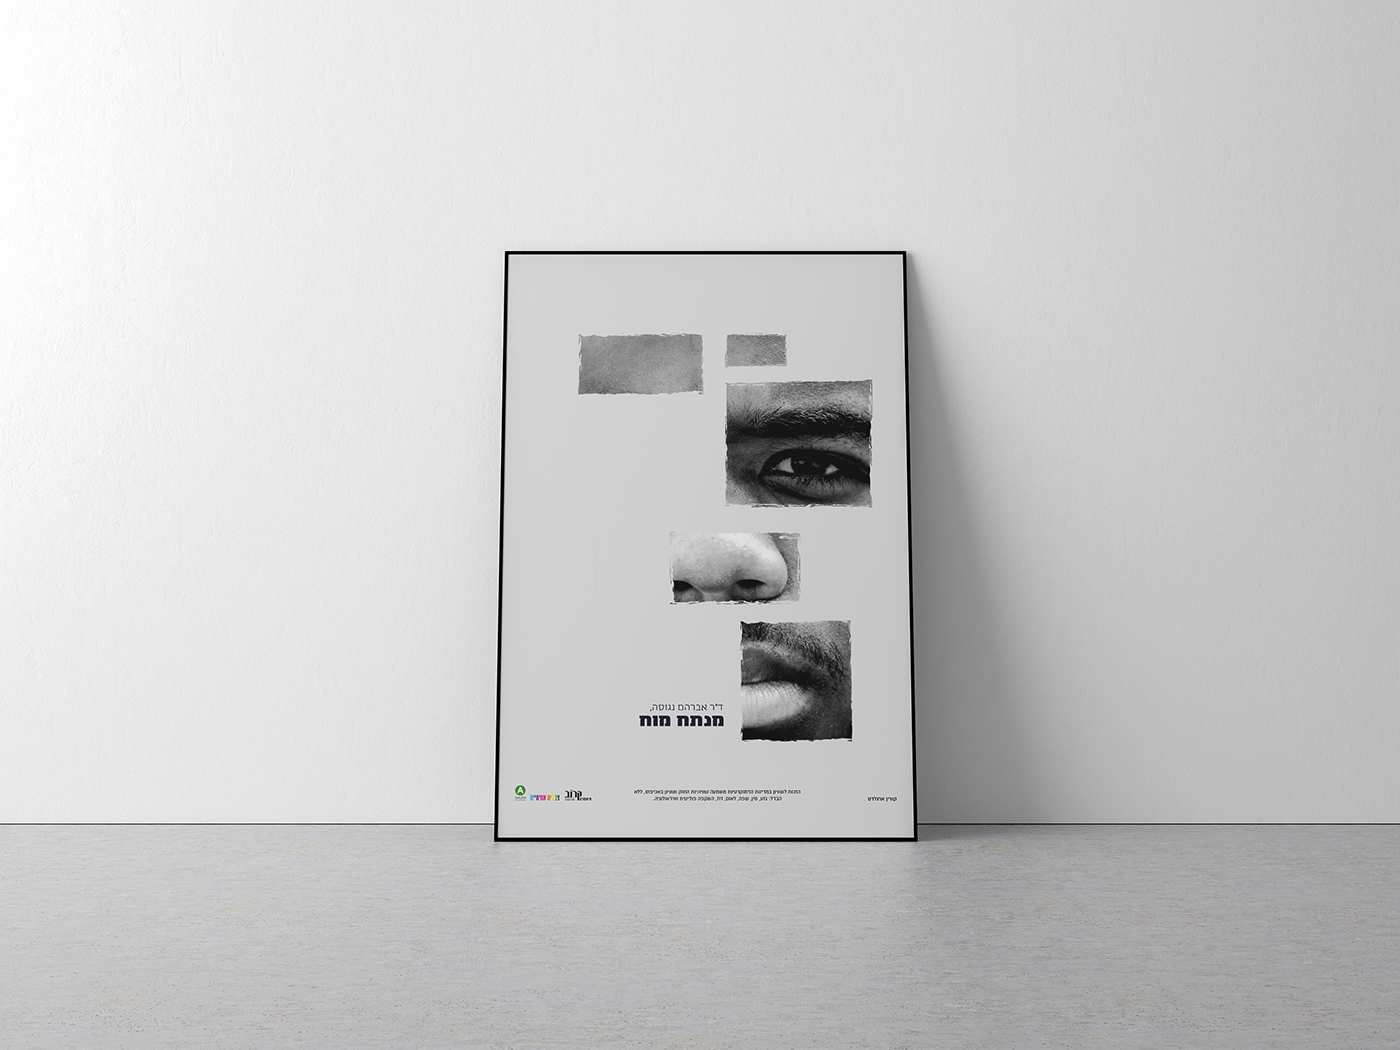 ad advertisement art direction  creative design equal rights Human rights Minimalism Photography  concept visual art